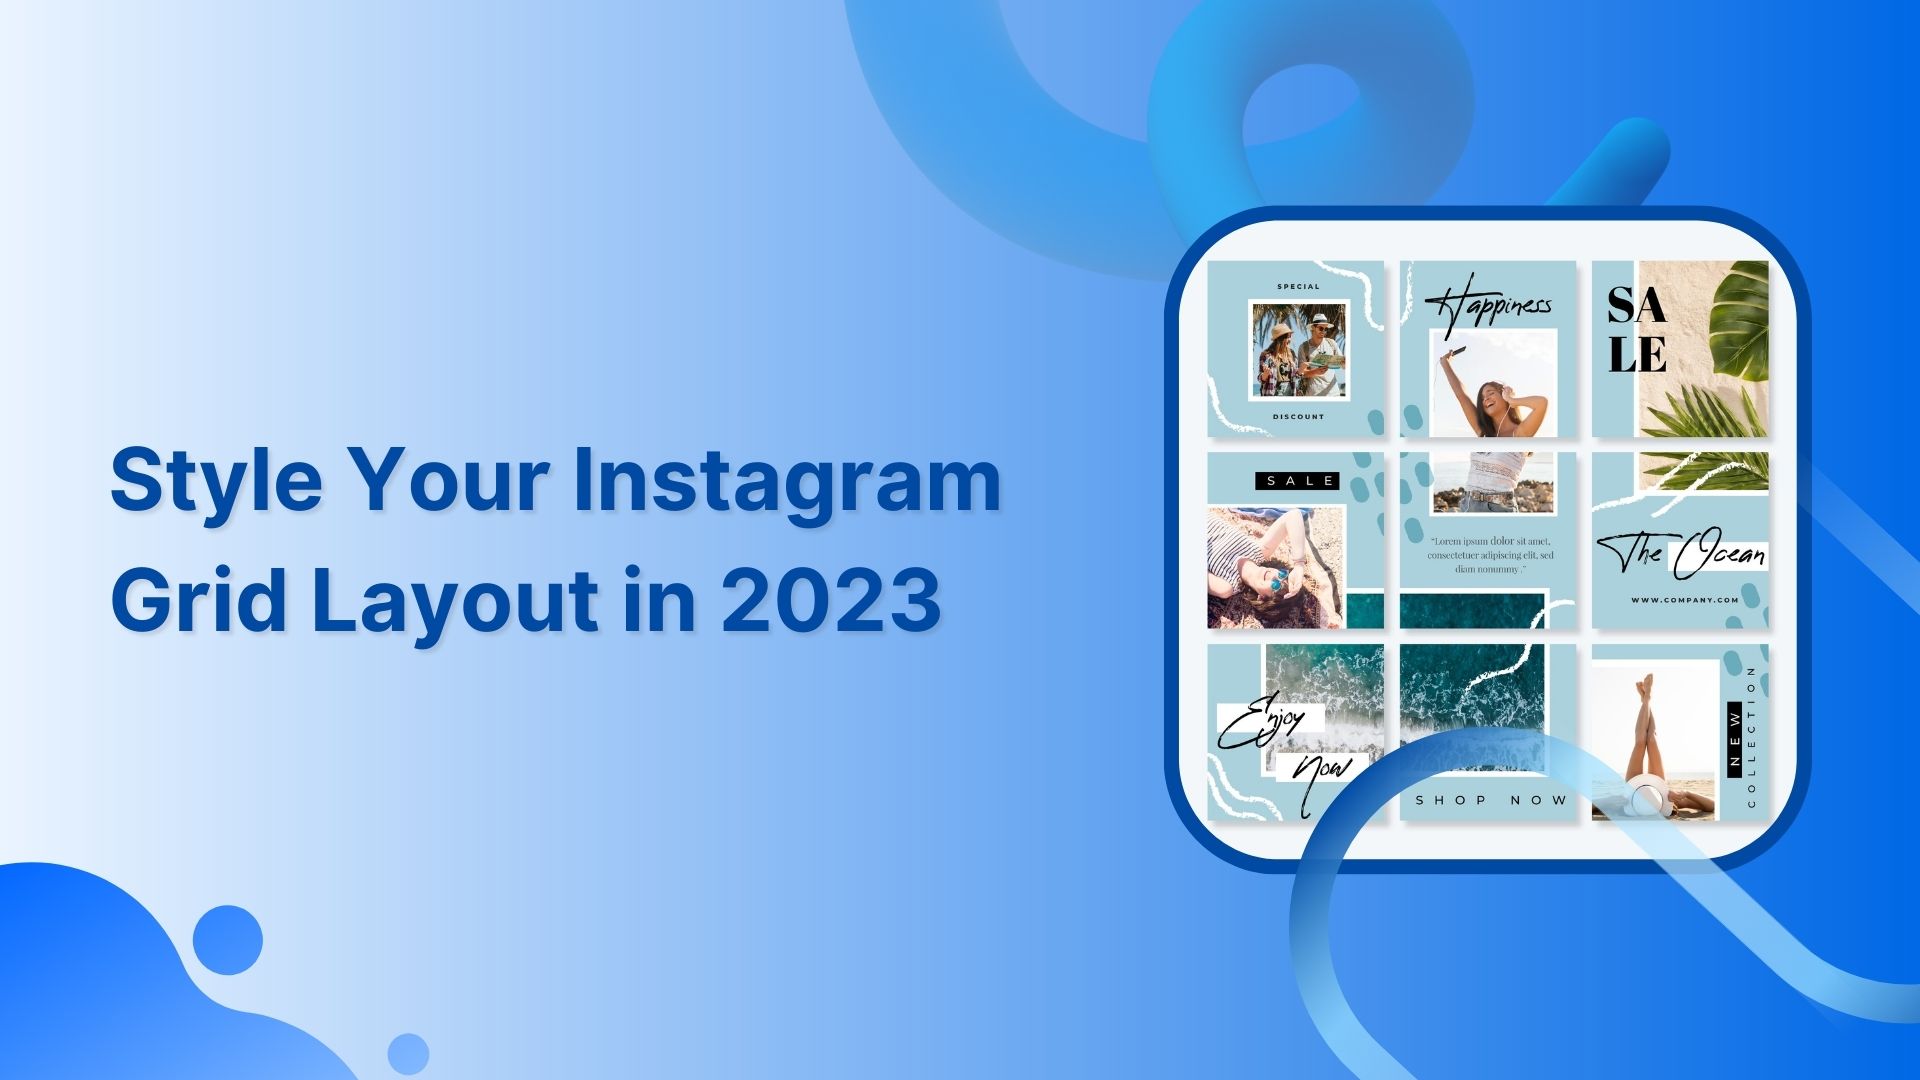 Style your Instagram Grid Layout in 2023